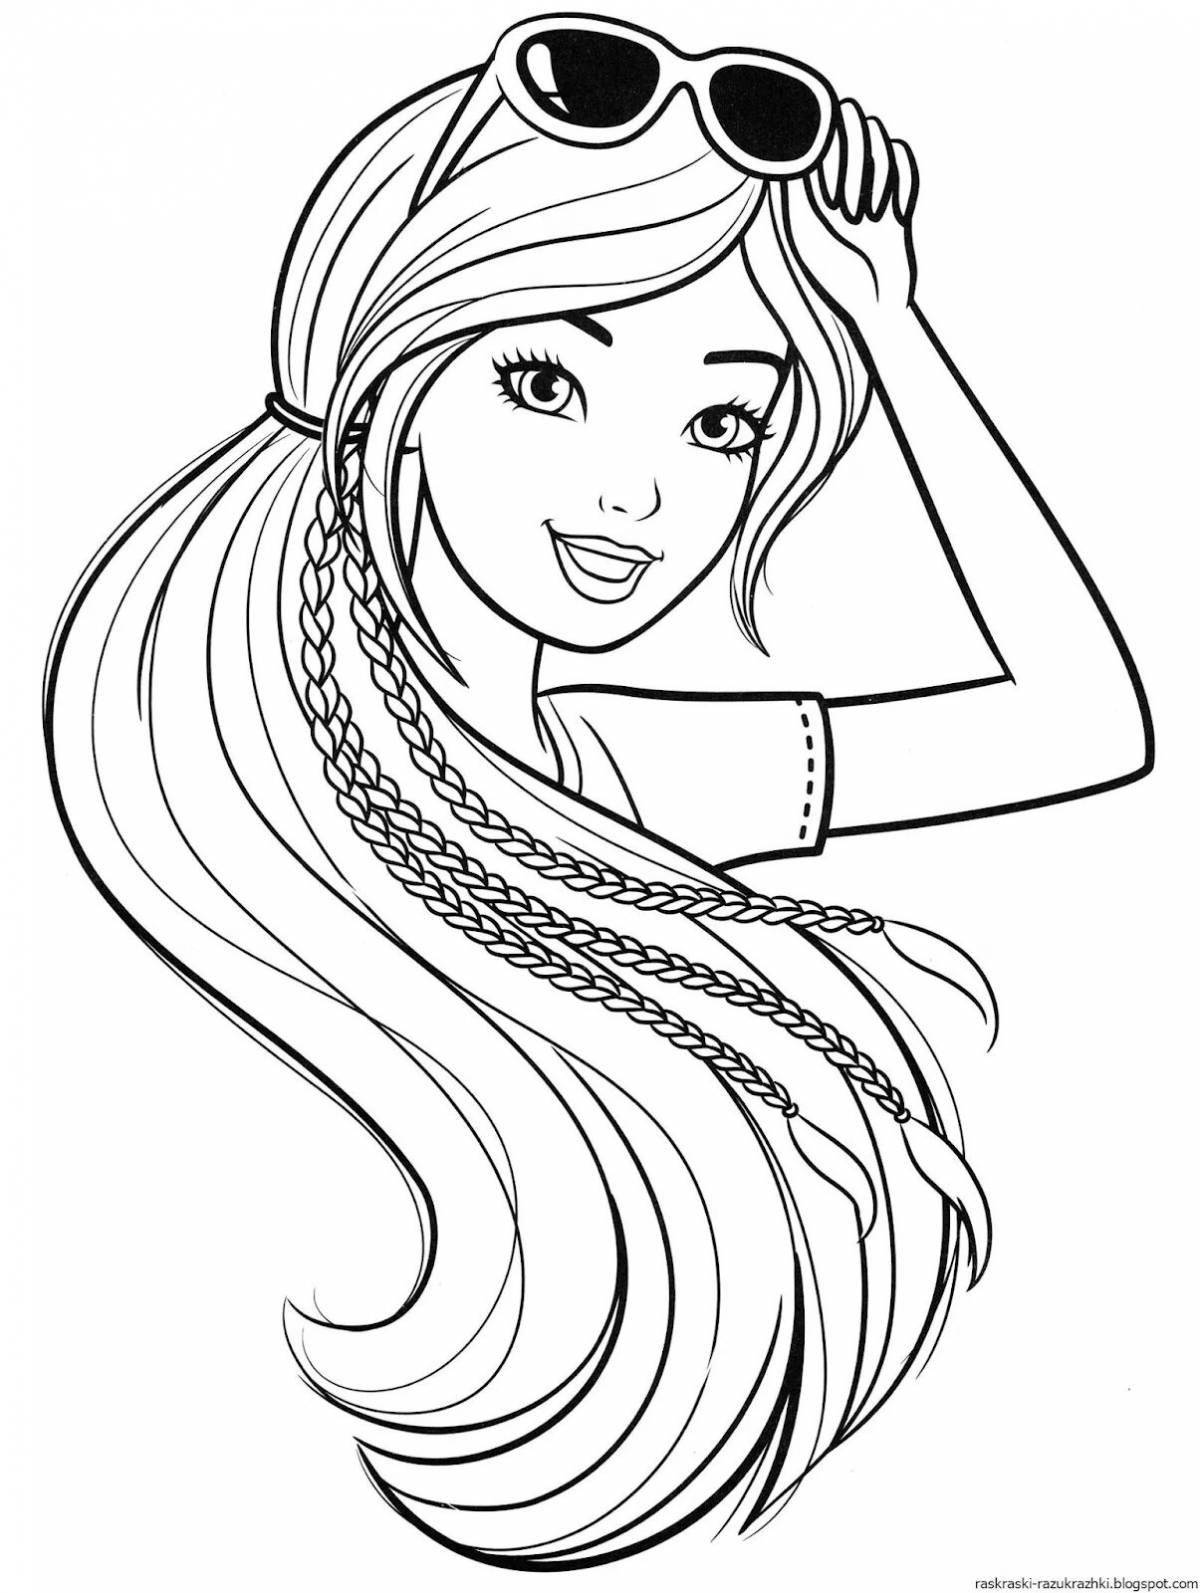 Amazing 11 year old coloring book for girls